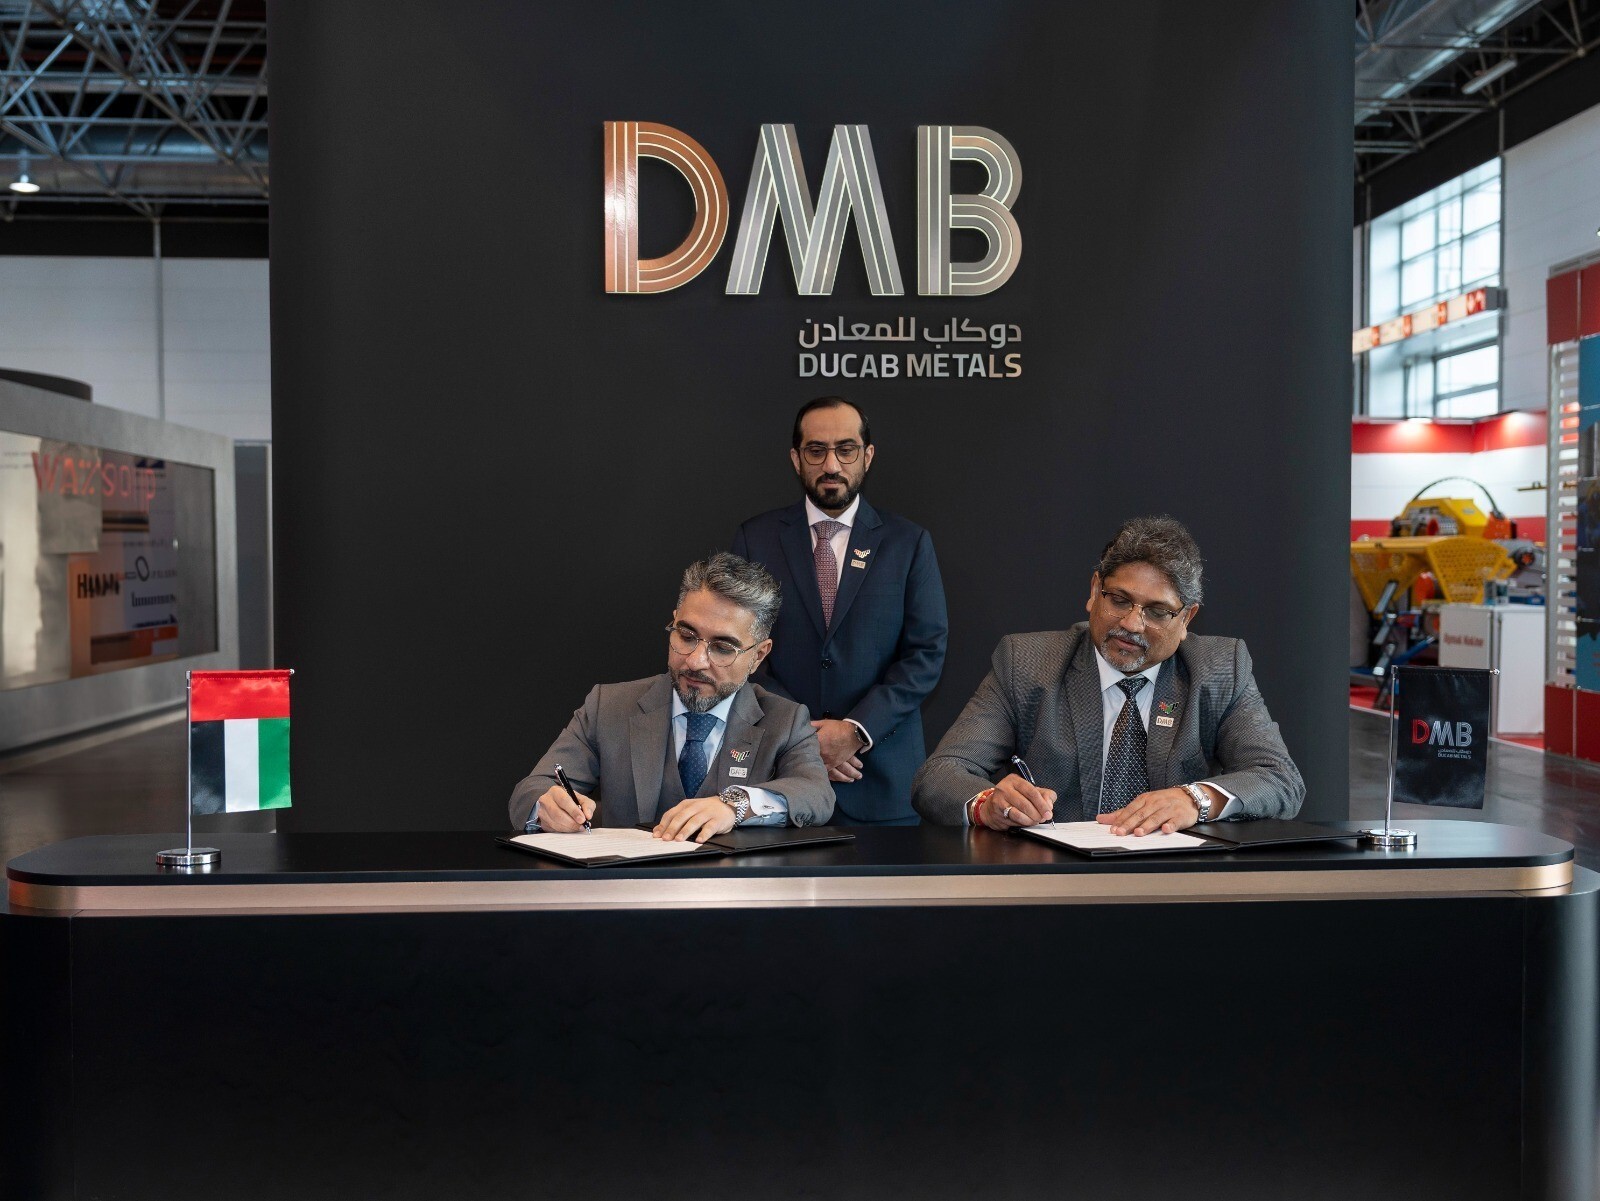 Ducab Metals Business expands global portfolio with acquisition of GIC Magnet